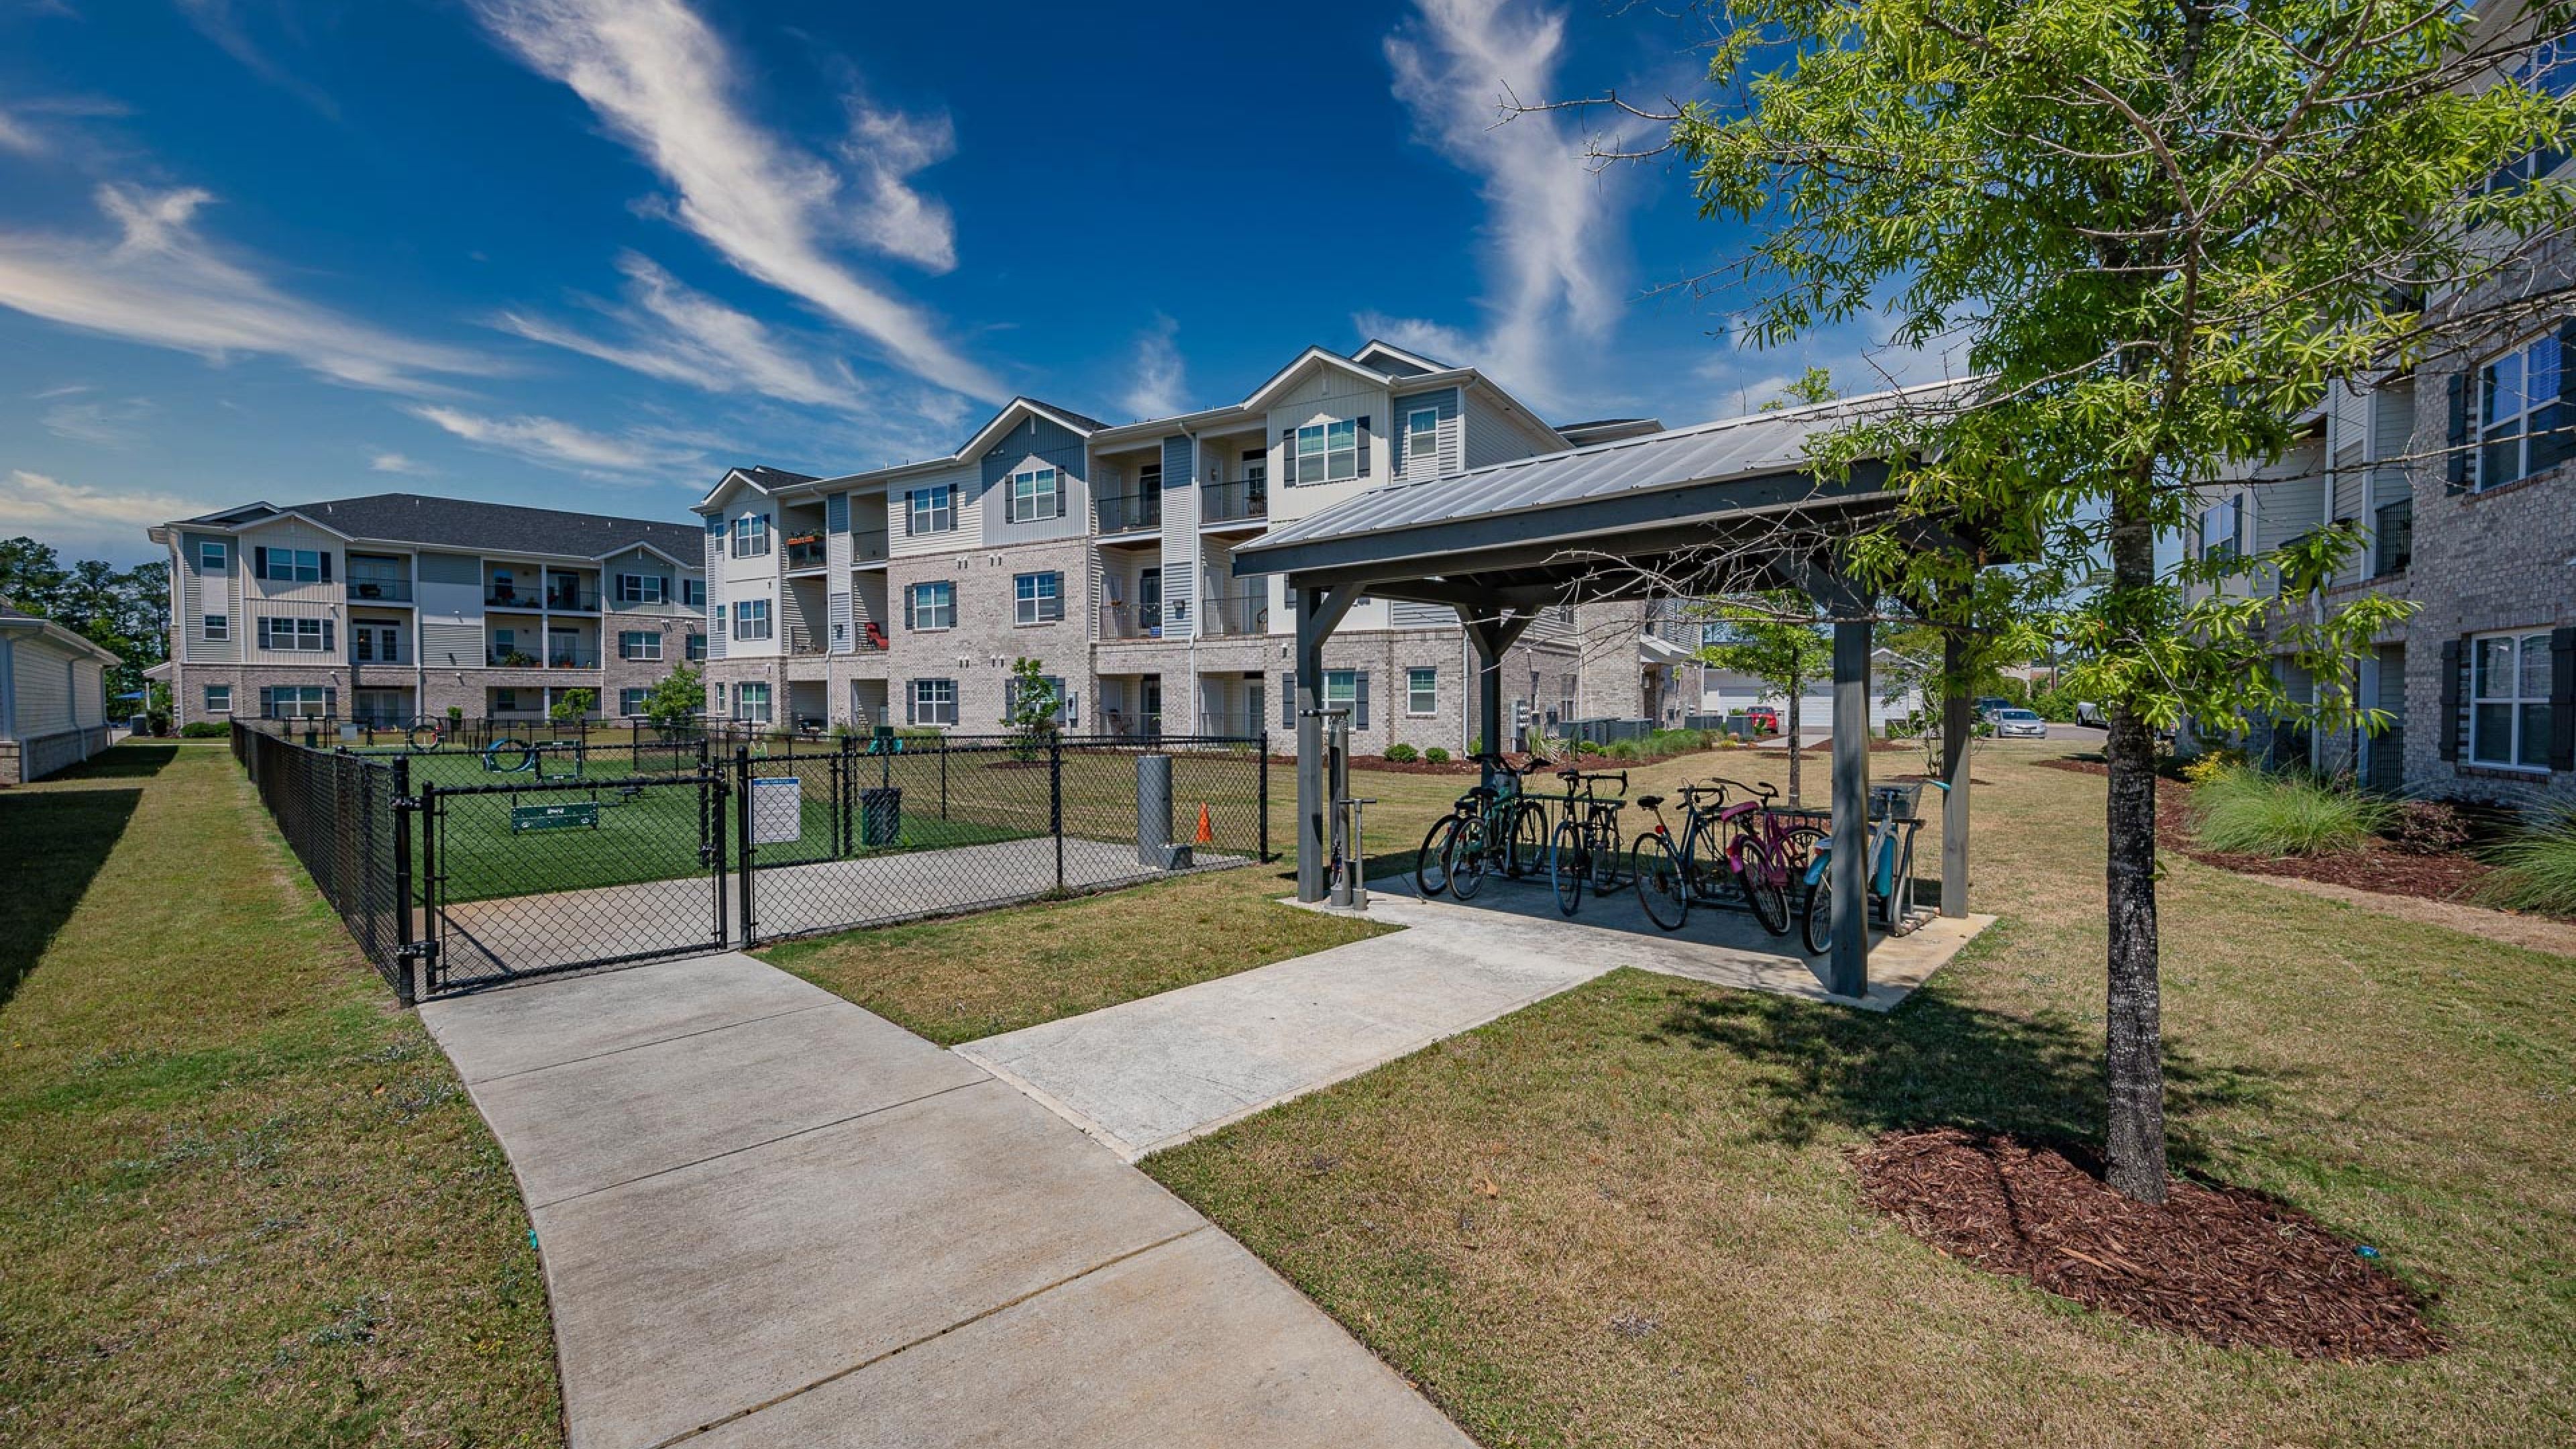 Hawthorne at Leland apartments community exterior with large green lawn